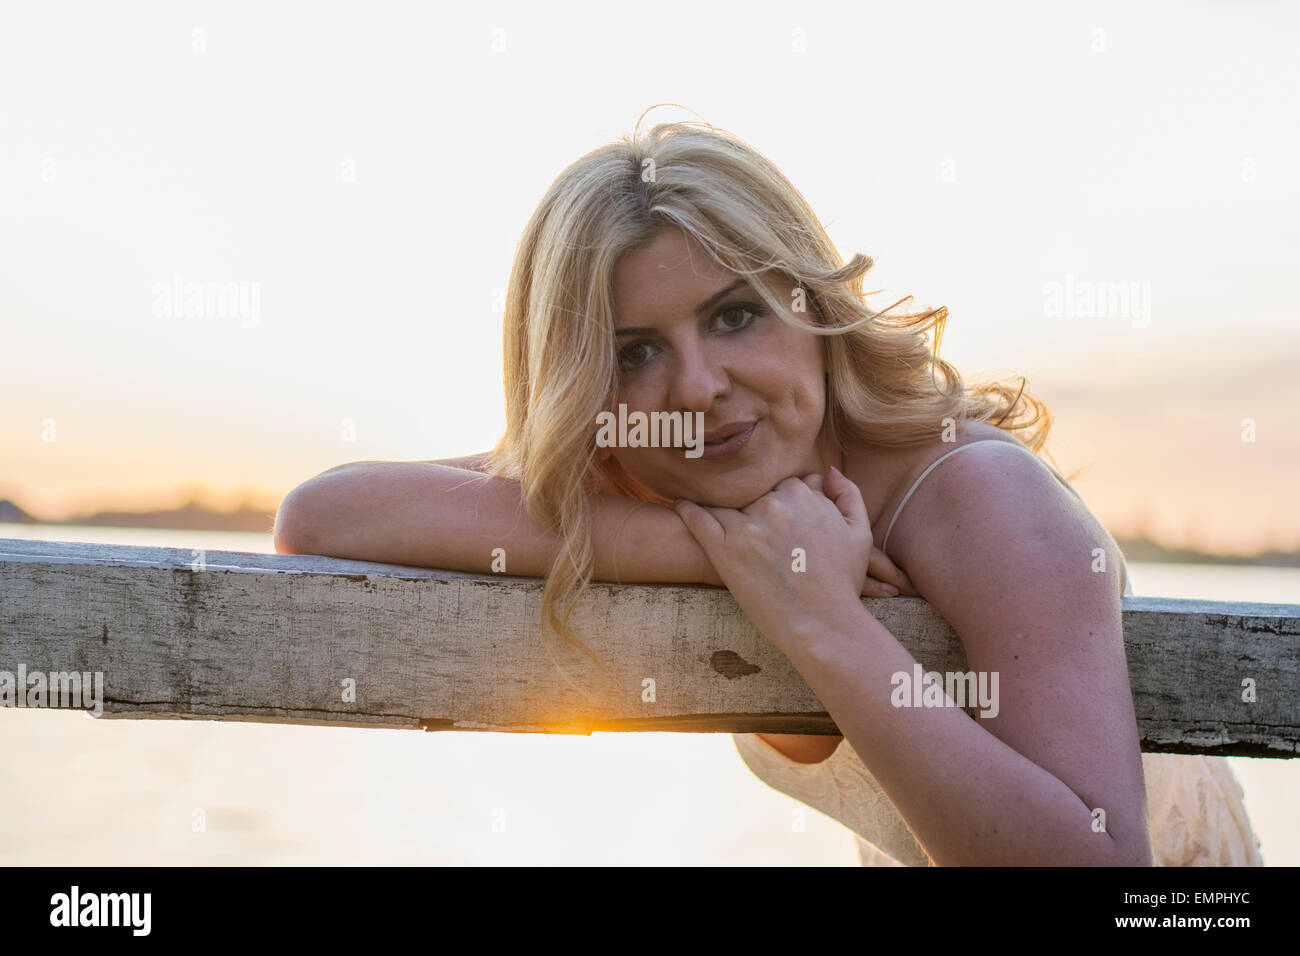 Portrait of beautiful blond curly woman sitting on old wooden bench with lake behind. Stock Photo